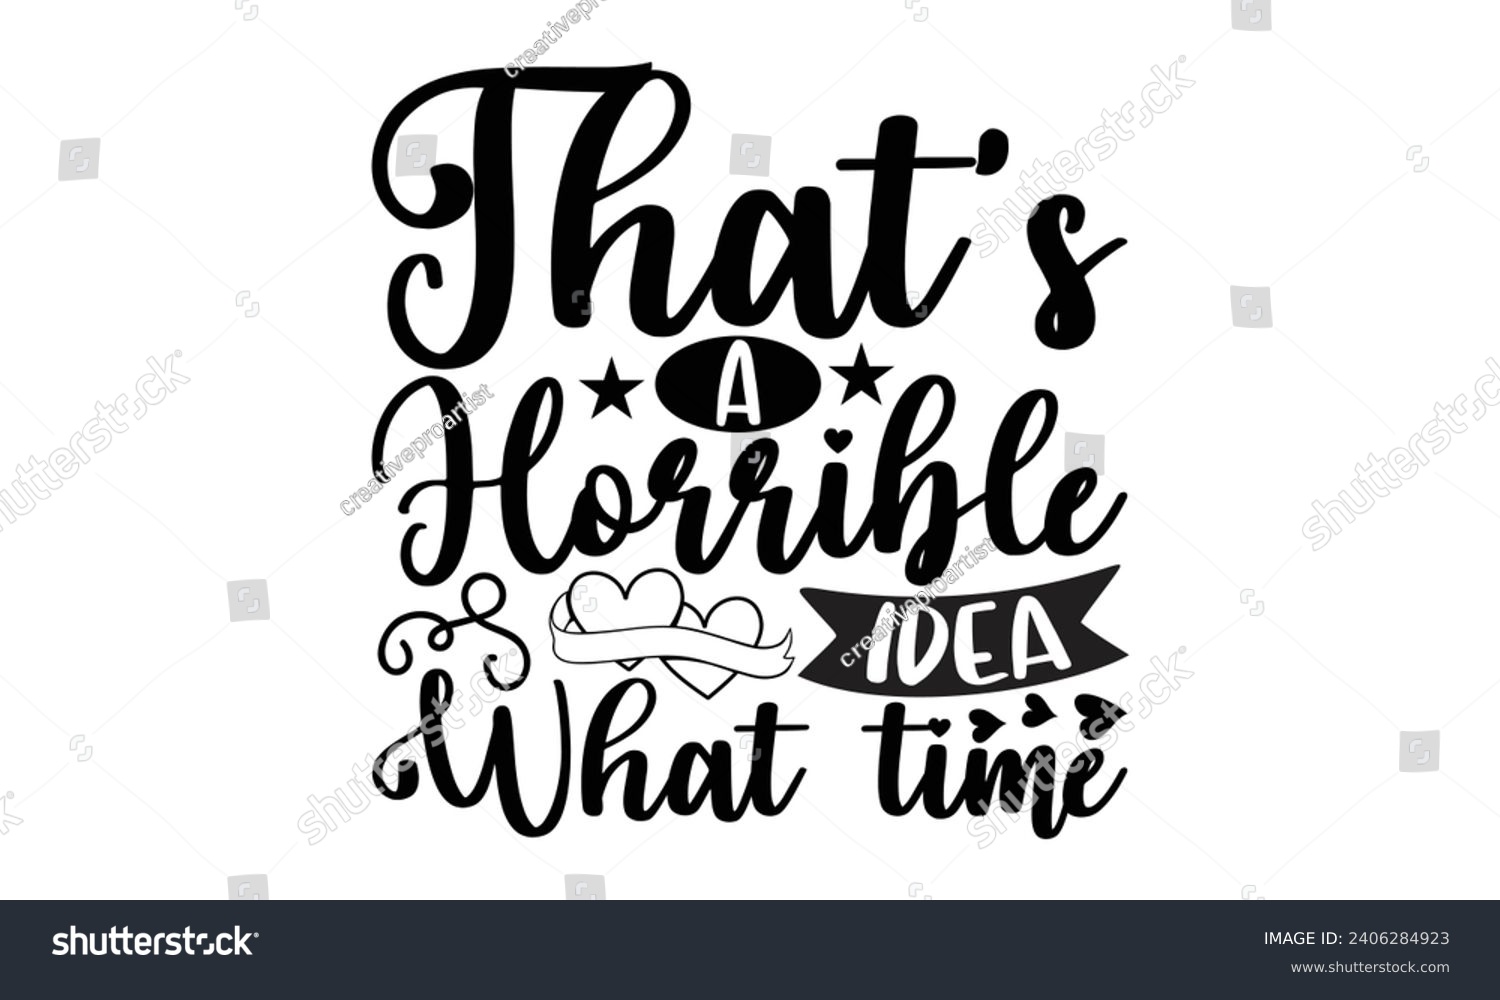 SVG of That’s A Horrible Idea What Time- Best friends t- shirt design, Hand drawn lettering phrase, Illustration for prints on bags, posters, cards eps, Files for Cutting, Isolated on white background. svg